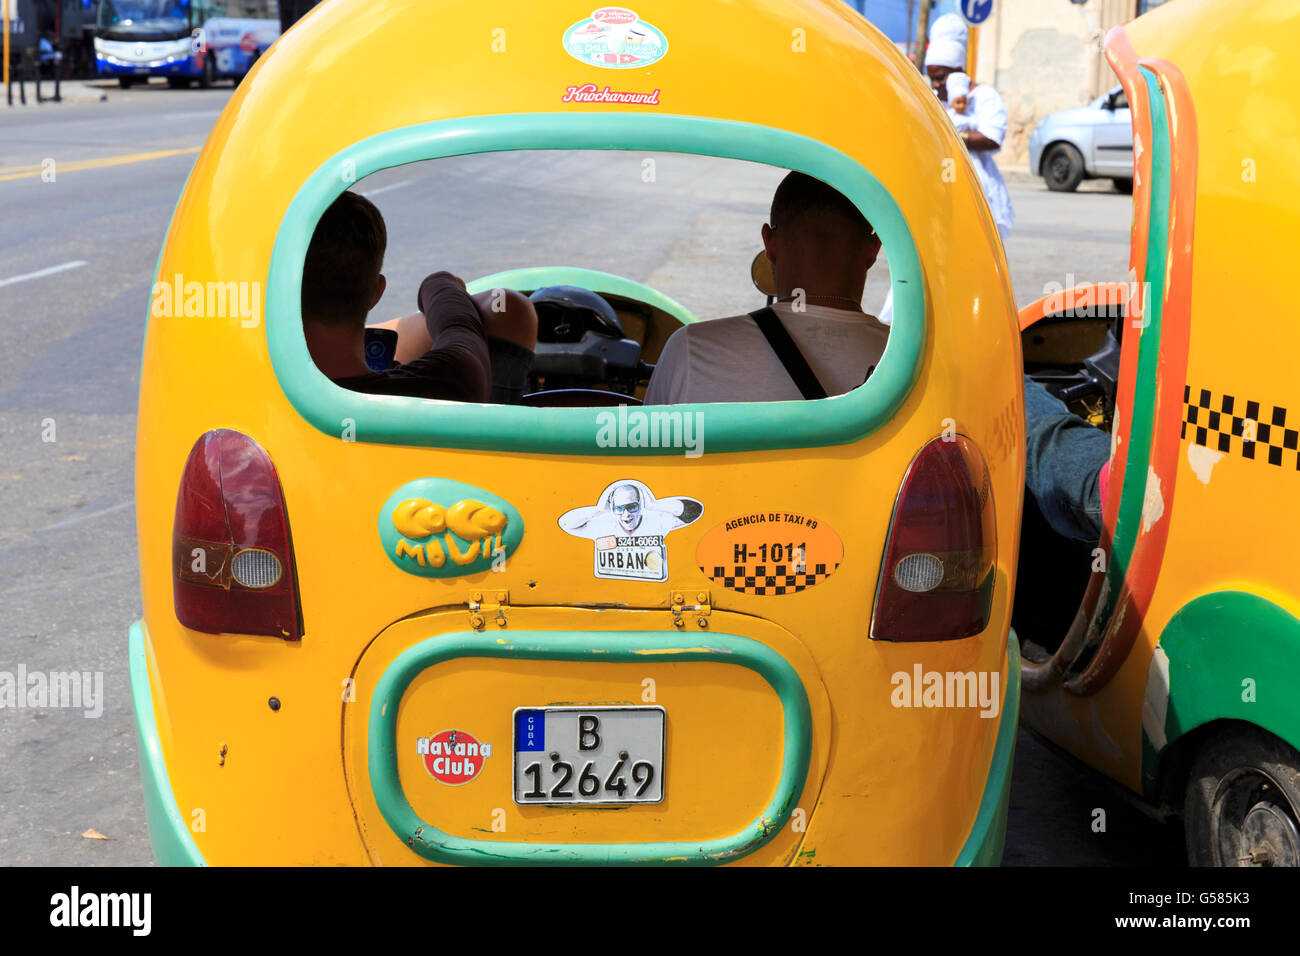 Coco Taxi, Small egg-shaped cab licensed to carry two passengers, Havana, Cuba Stock Photo